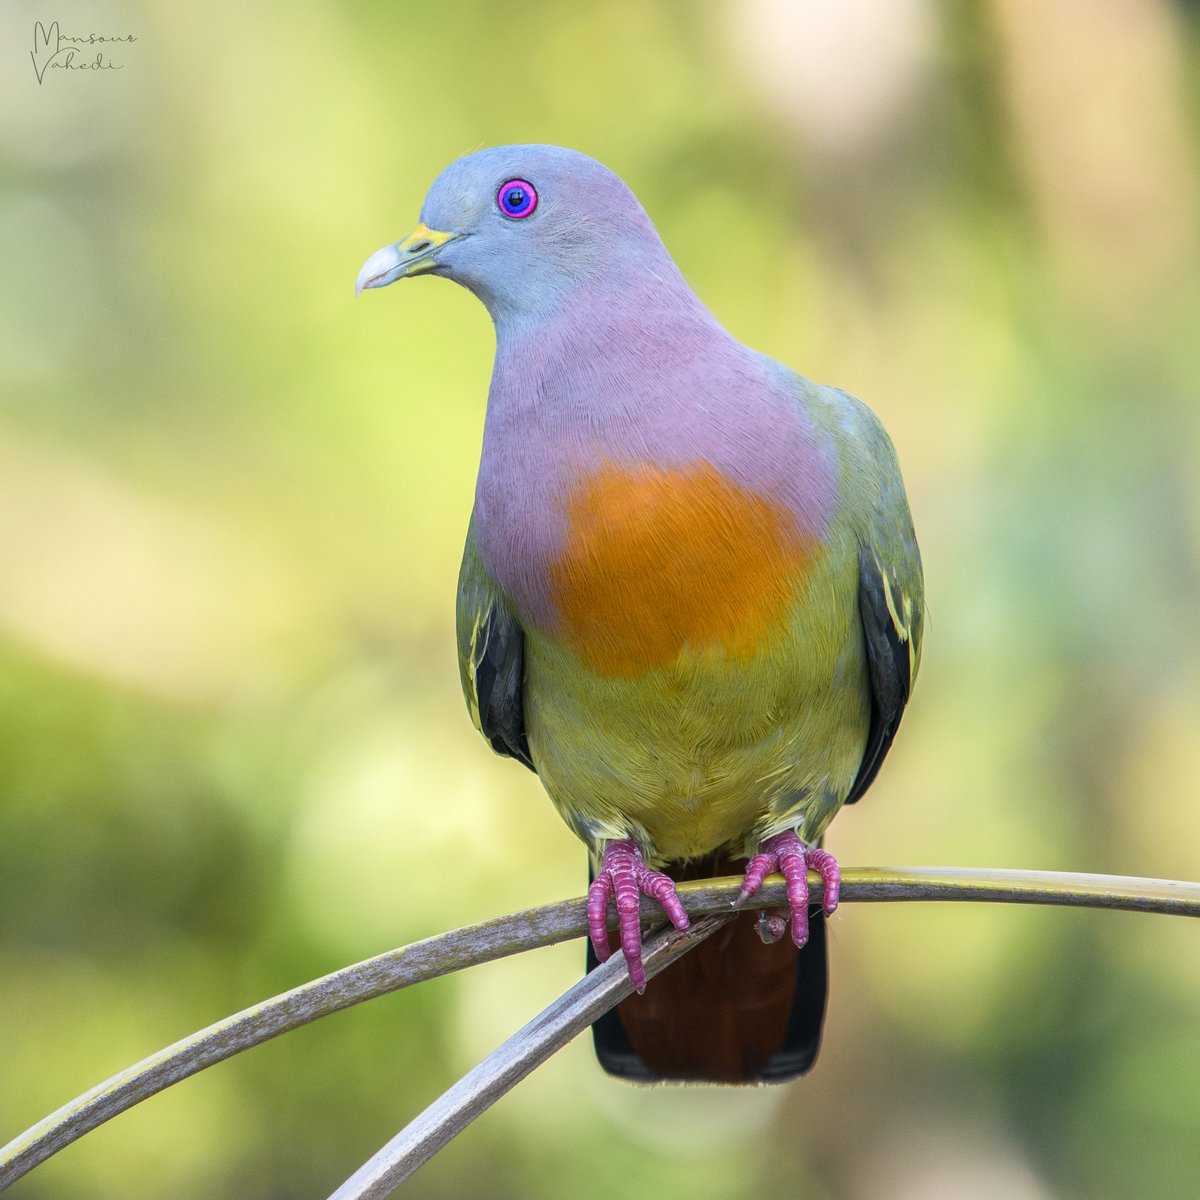 Pink-necked green pigeon (Treron vernans)
Gardens by the Bay, Singapore
© All rights reserved.

#pinkneckedgreenpigeon #pigeon #pigeonsofinstagram #birdsofsingapore